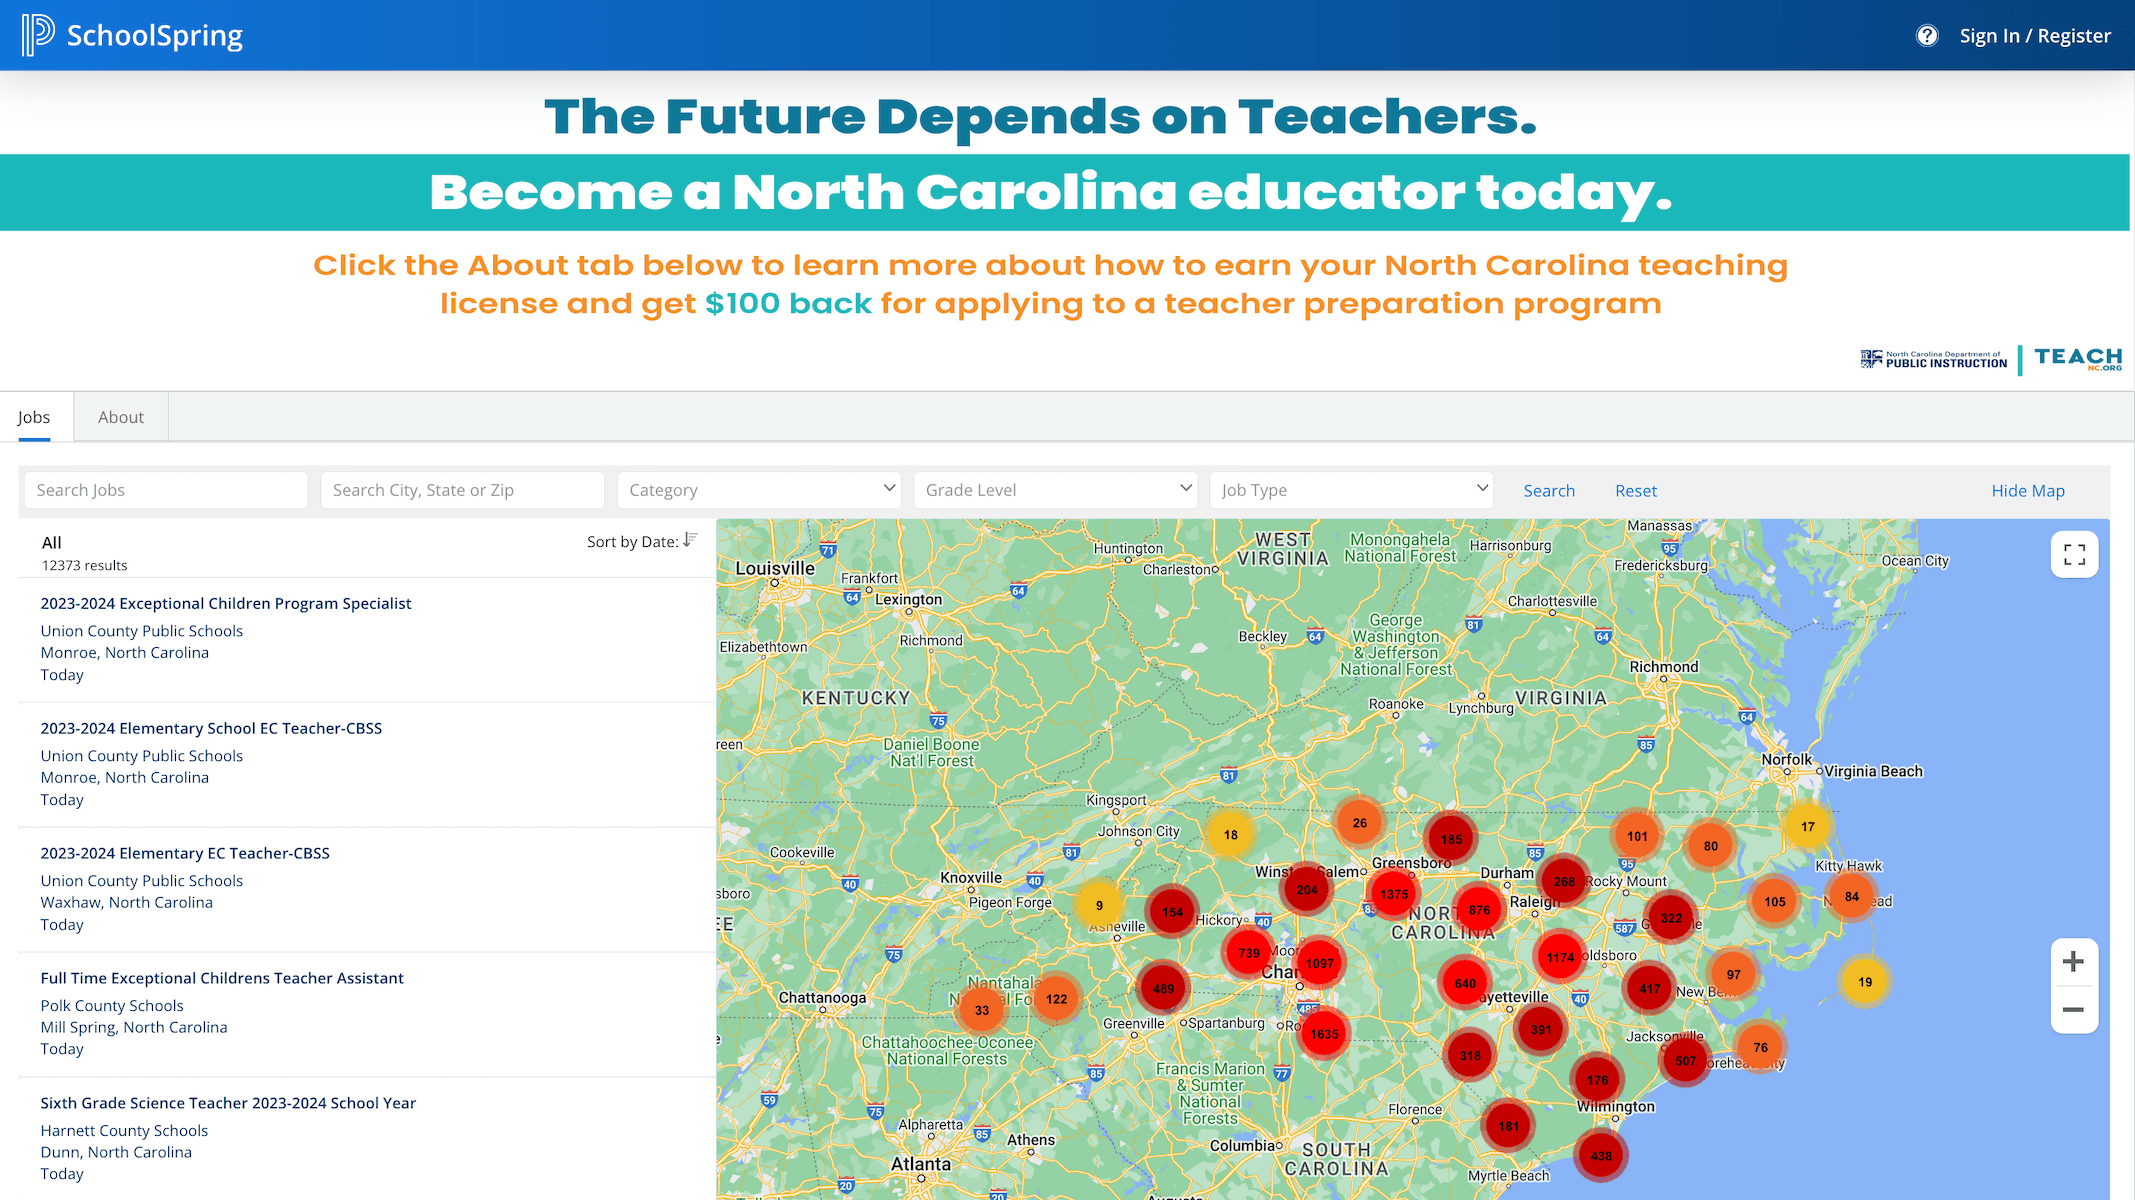 A screenshot of the SchoolSpring job board: A descending list of available jobs is on the left. A map of North Carolina is on the right, with open job locations pinned around the state.